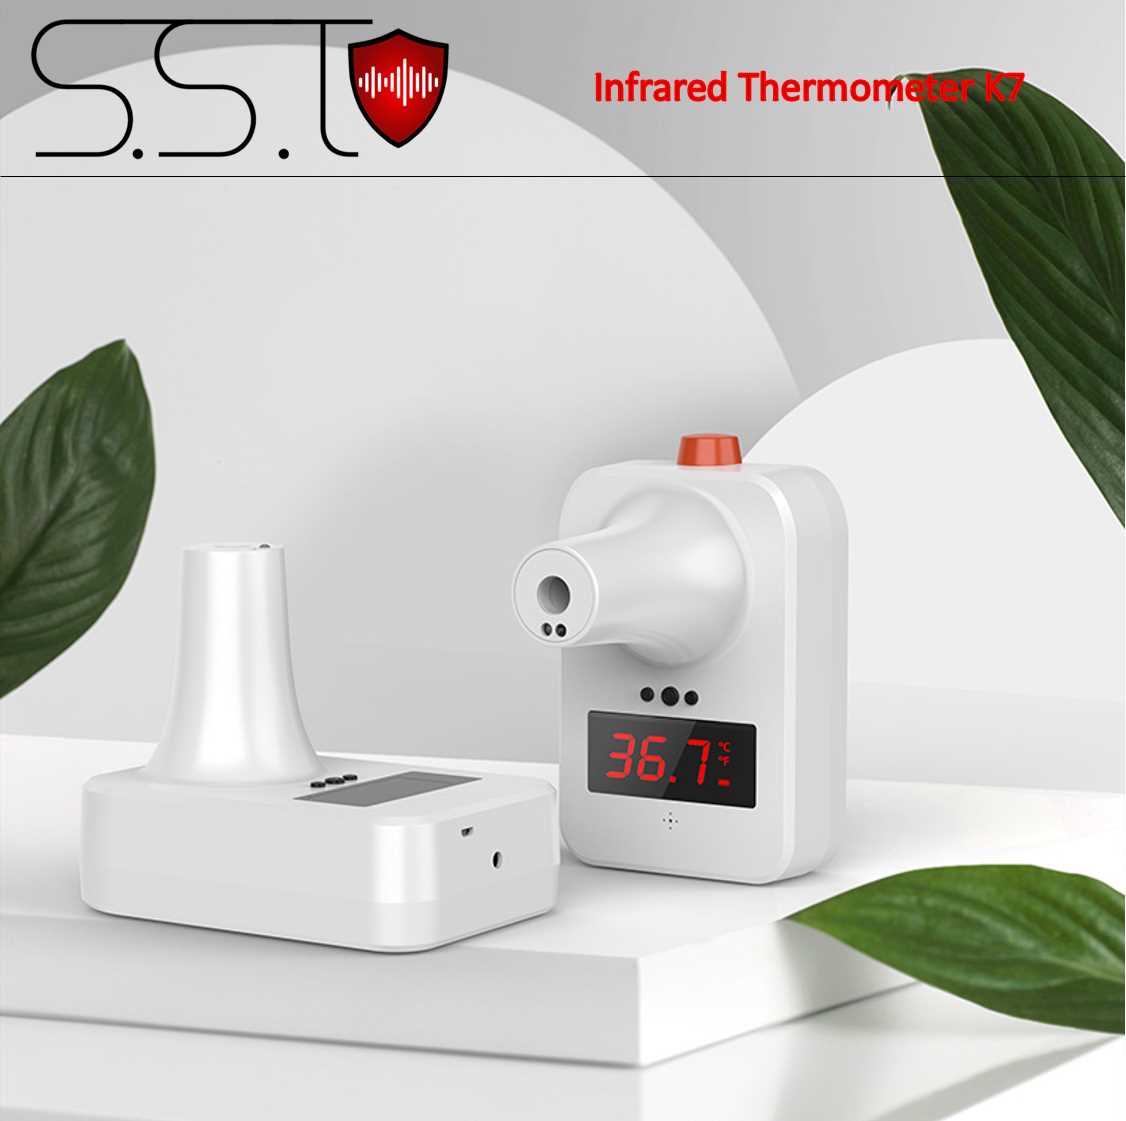 Infrared Thermometer K7 For Sale SSTechnologies , SST, Sound And Safety Technologies Sri Lanka.